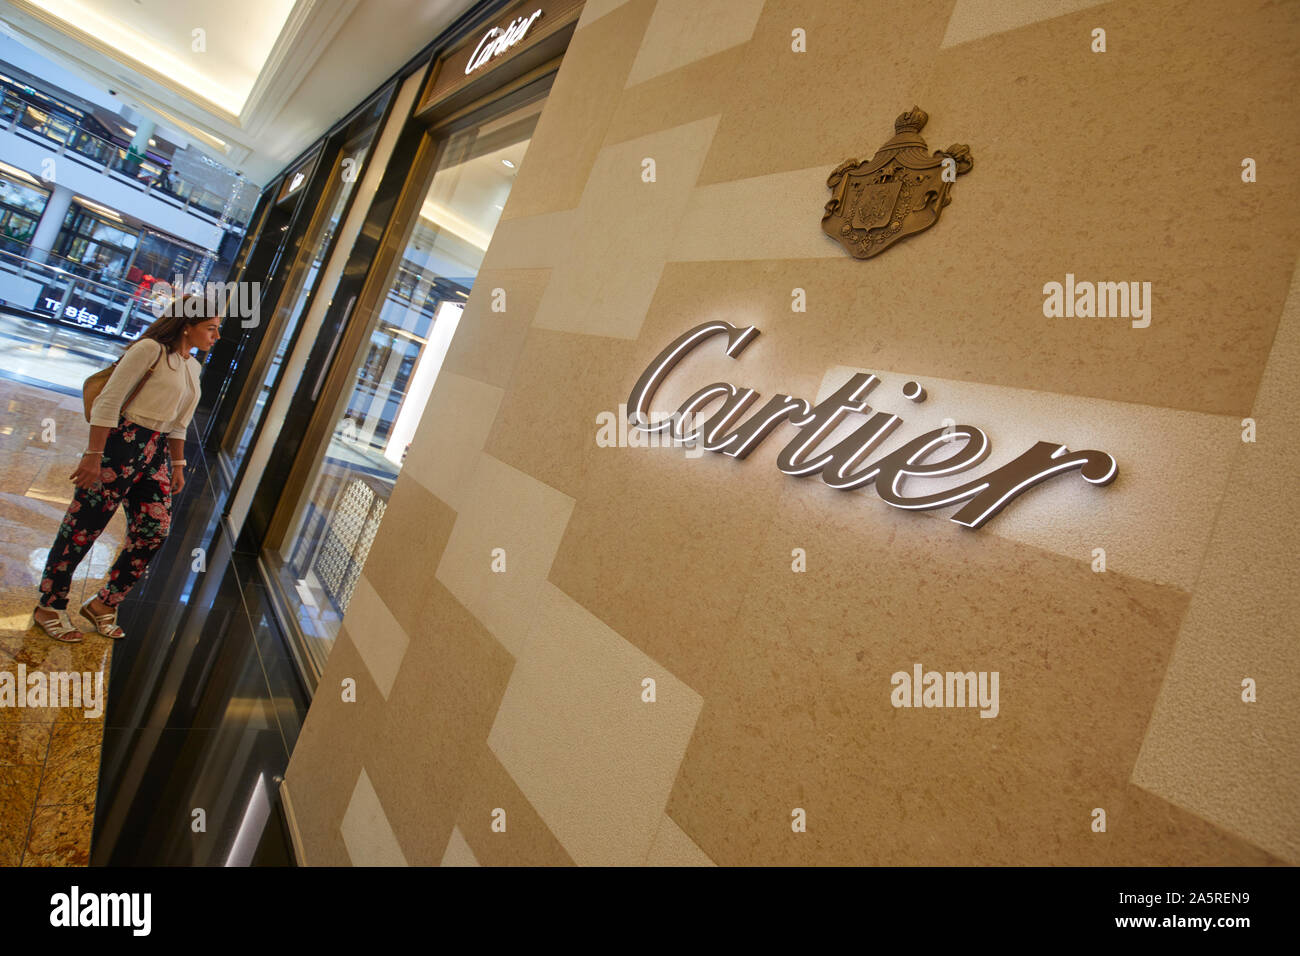 cartier mall of emirates number